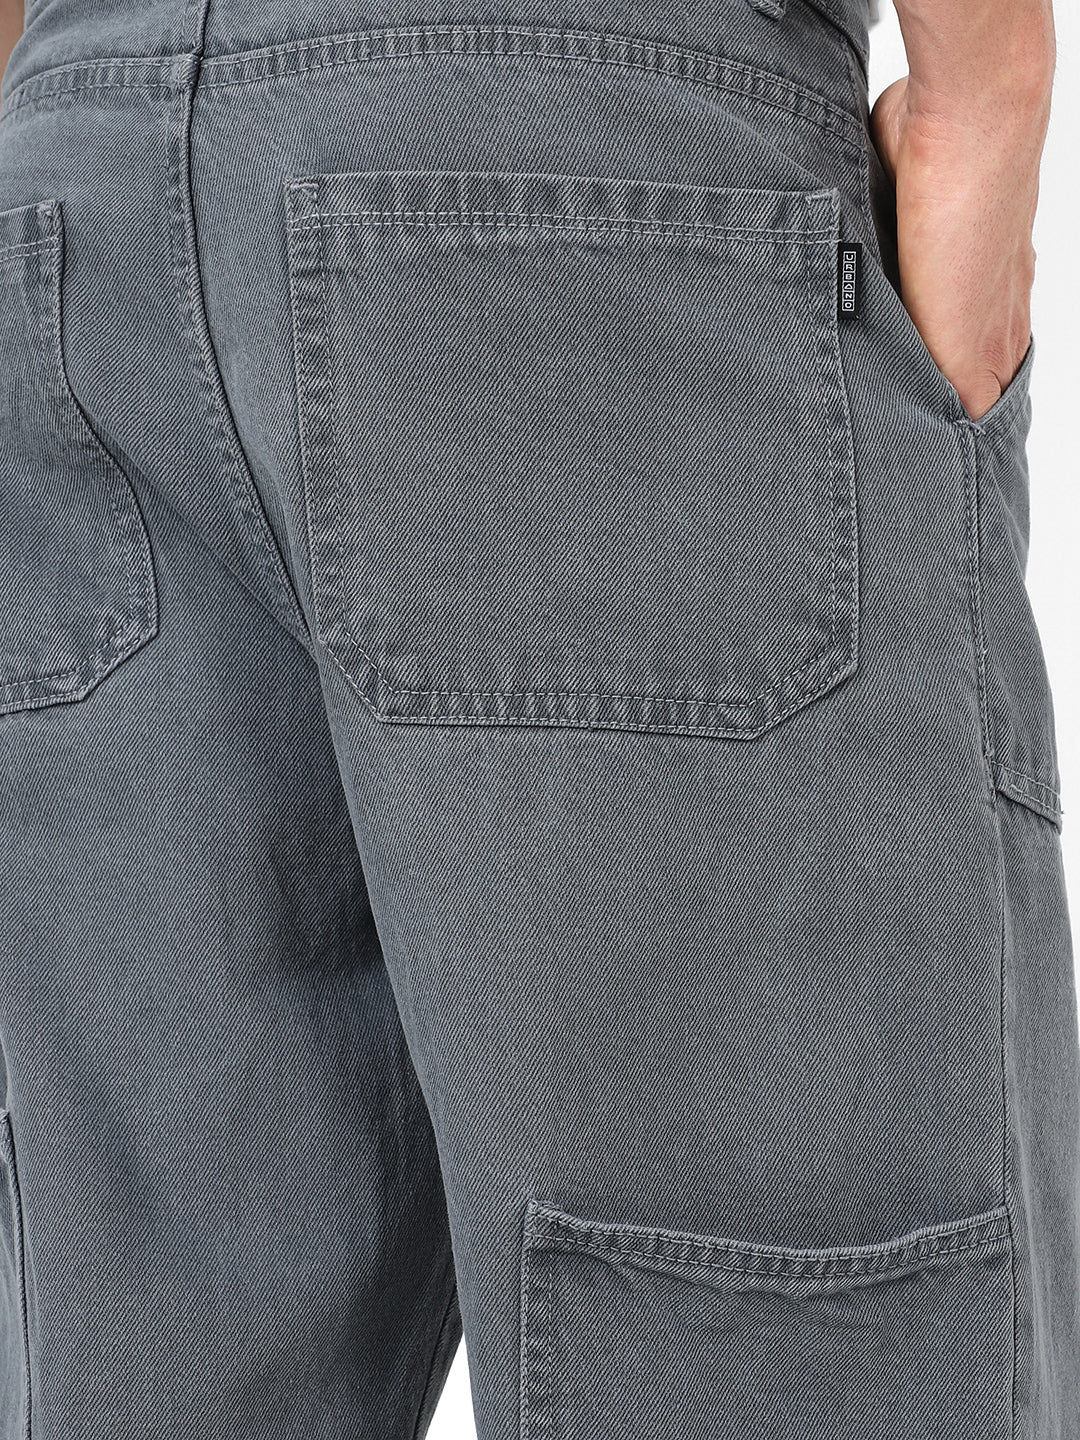 Men's Light Grey Loose Fit Cargo Carpenter Jeans With 6 Pockets Non-Stretchable